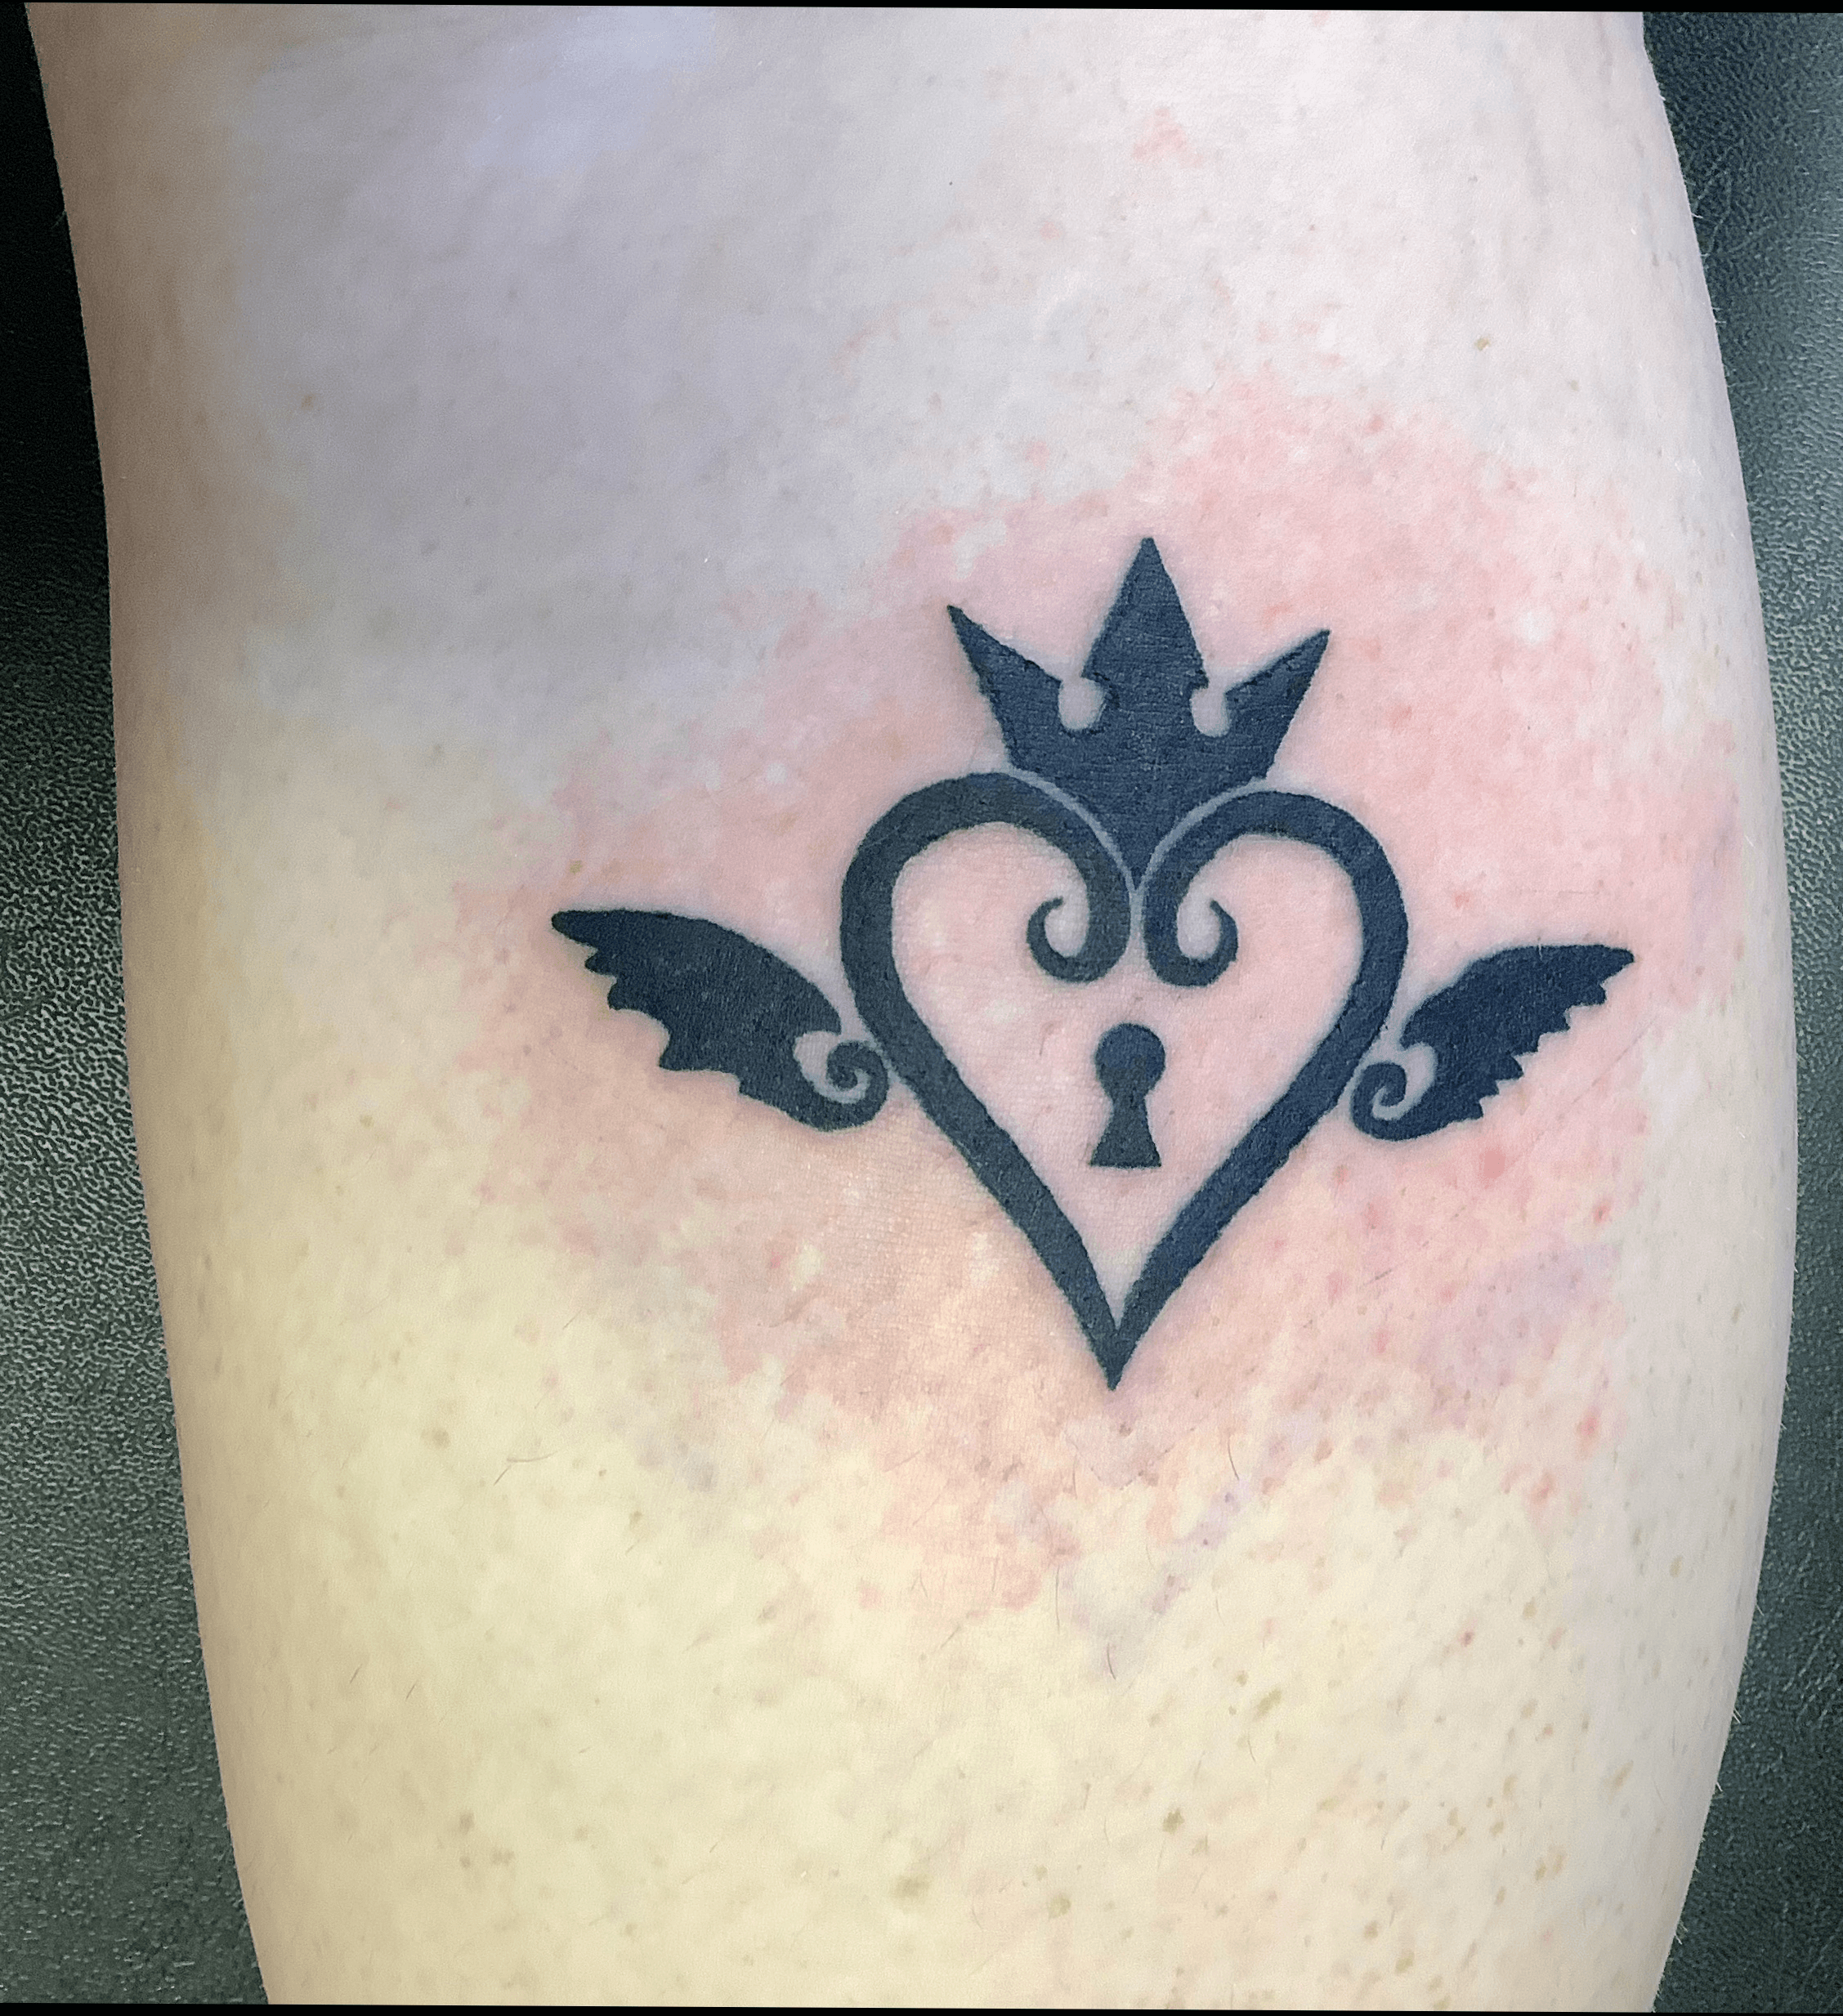 Tattoo uploaded by Rachael Ann  A design done in June 2020 located on the  back of my right calf Its inspired by Kingdom Hearts and drawn by me  This emblem will